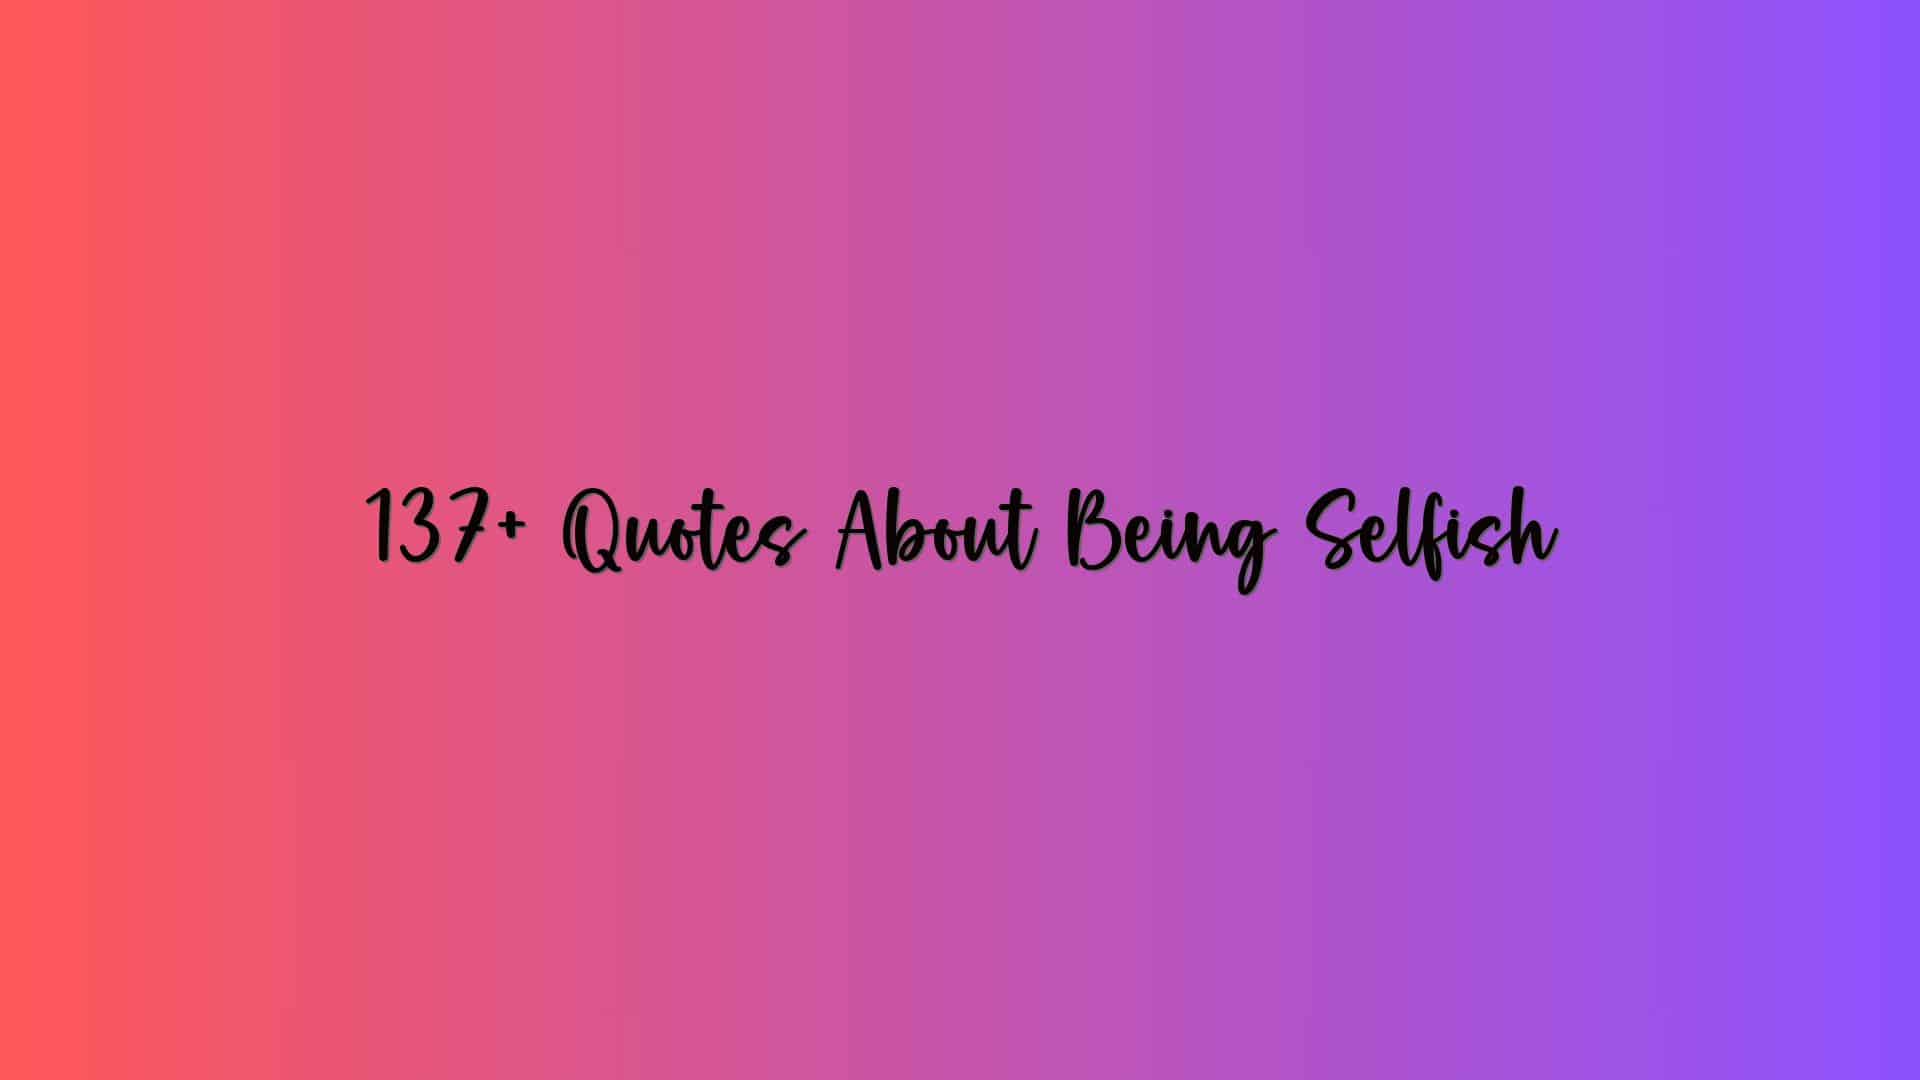 137+ Quotes About Being Selfish